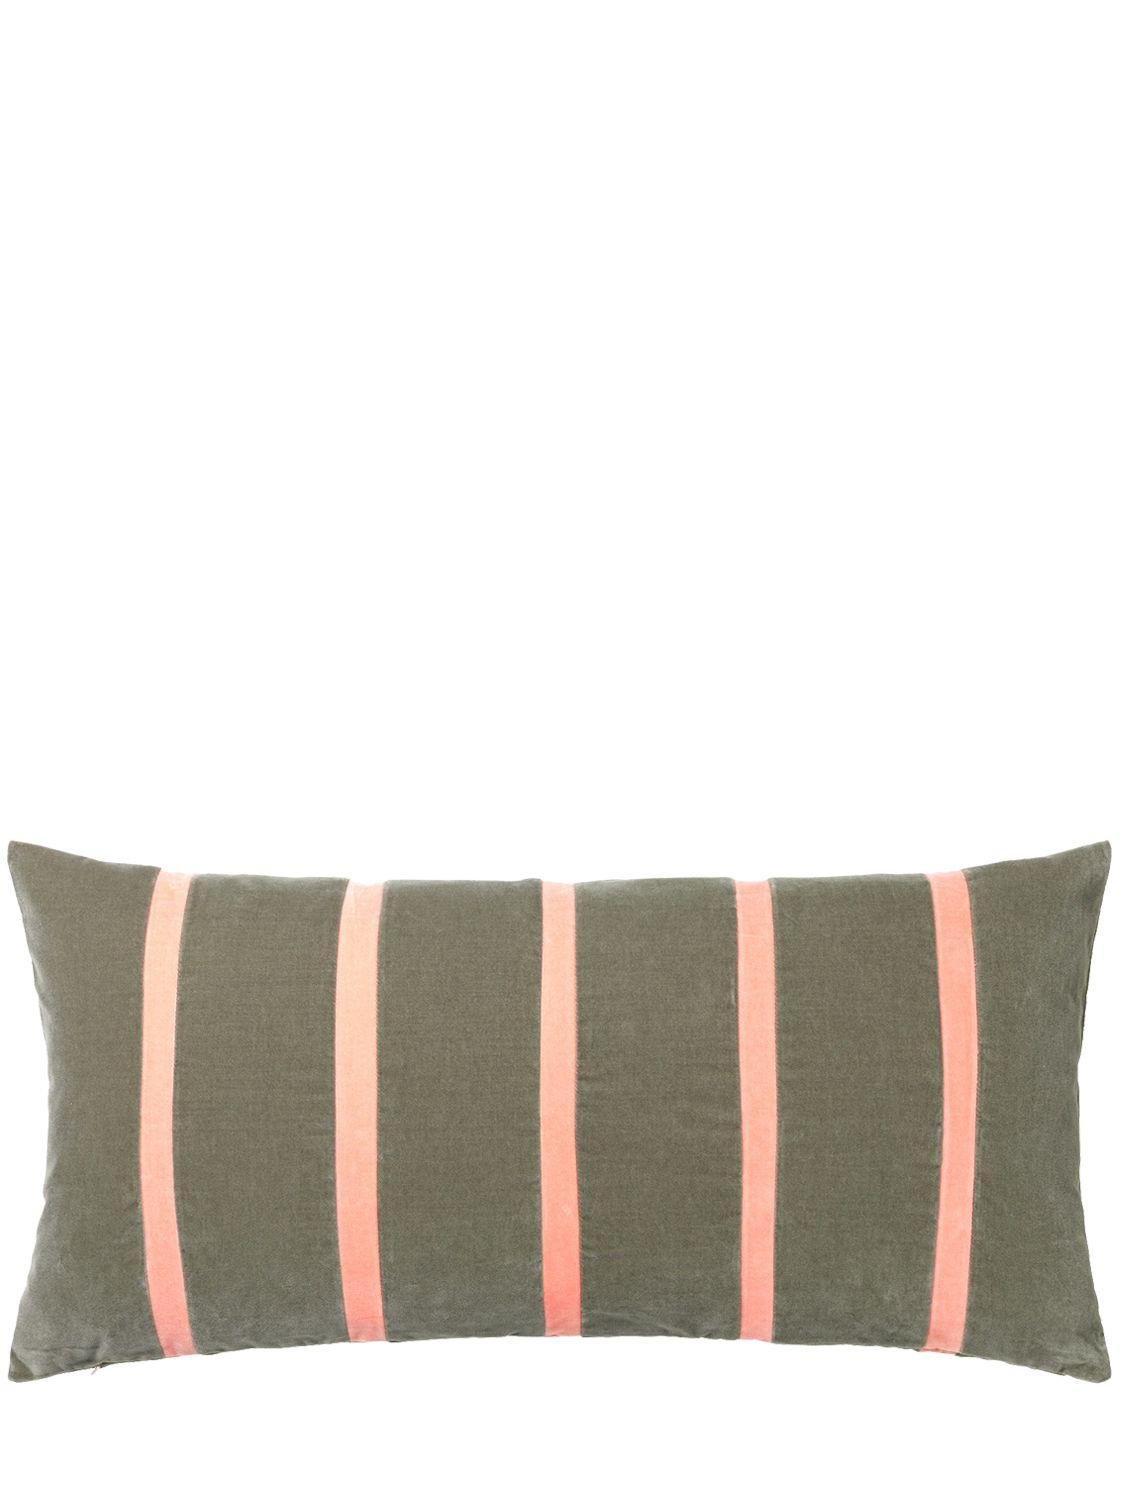 Pippa Cushion by CHRISTINA LUNDSTEEN